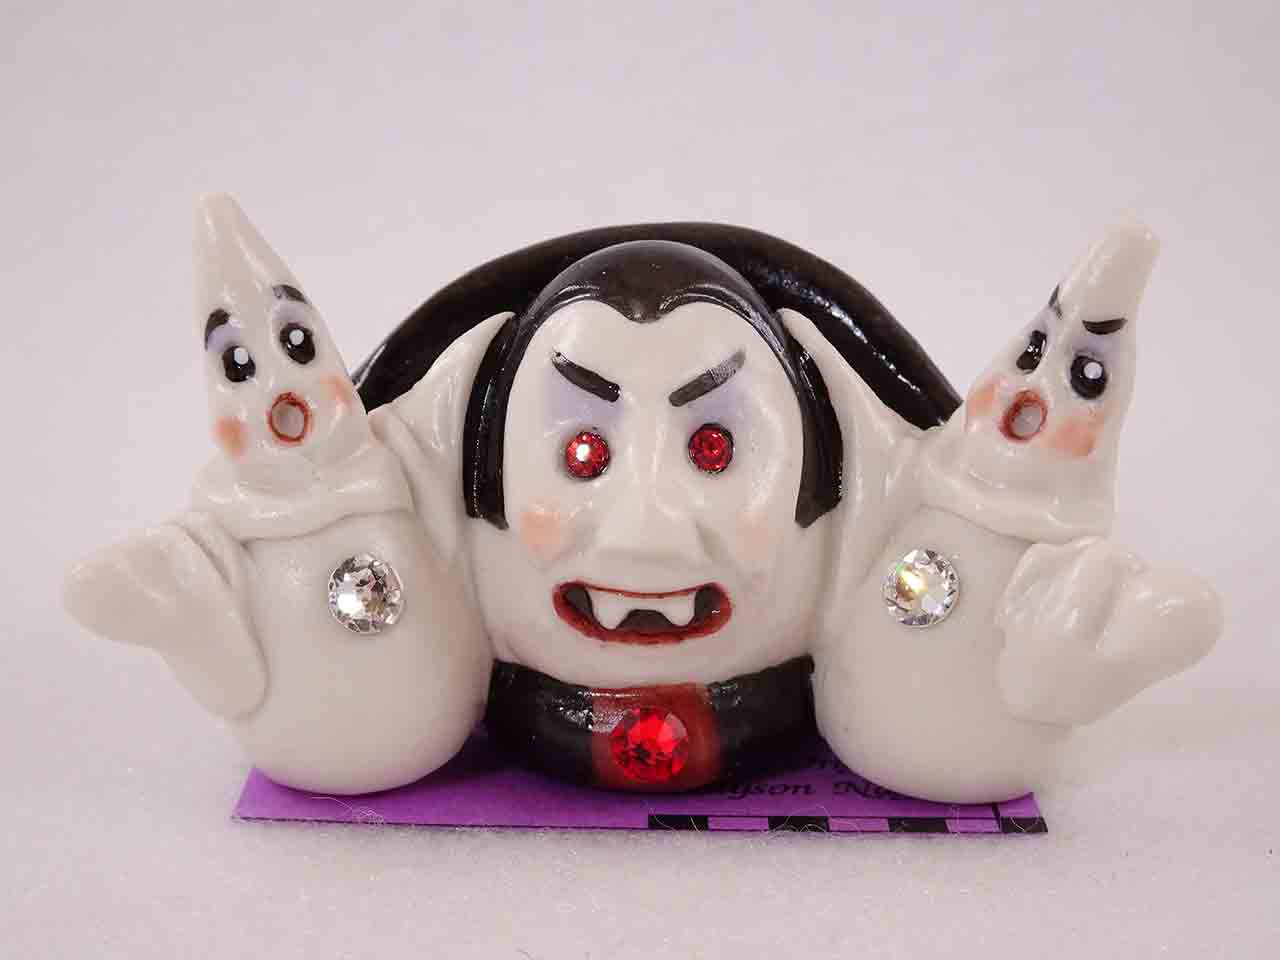 Allyson Nagel miniature one piece holiday salt and pepper shakers - Halloween Dracula vampire and ghosts